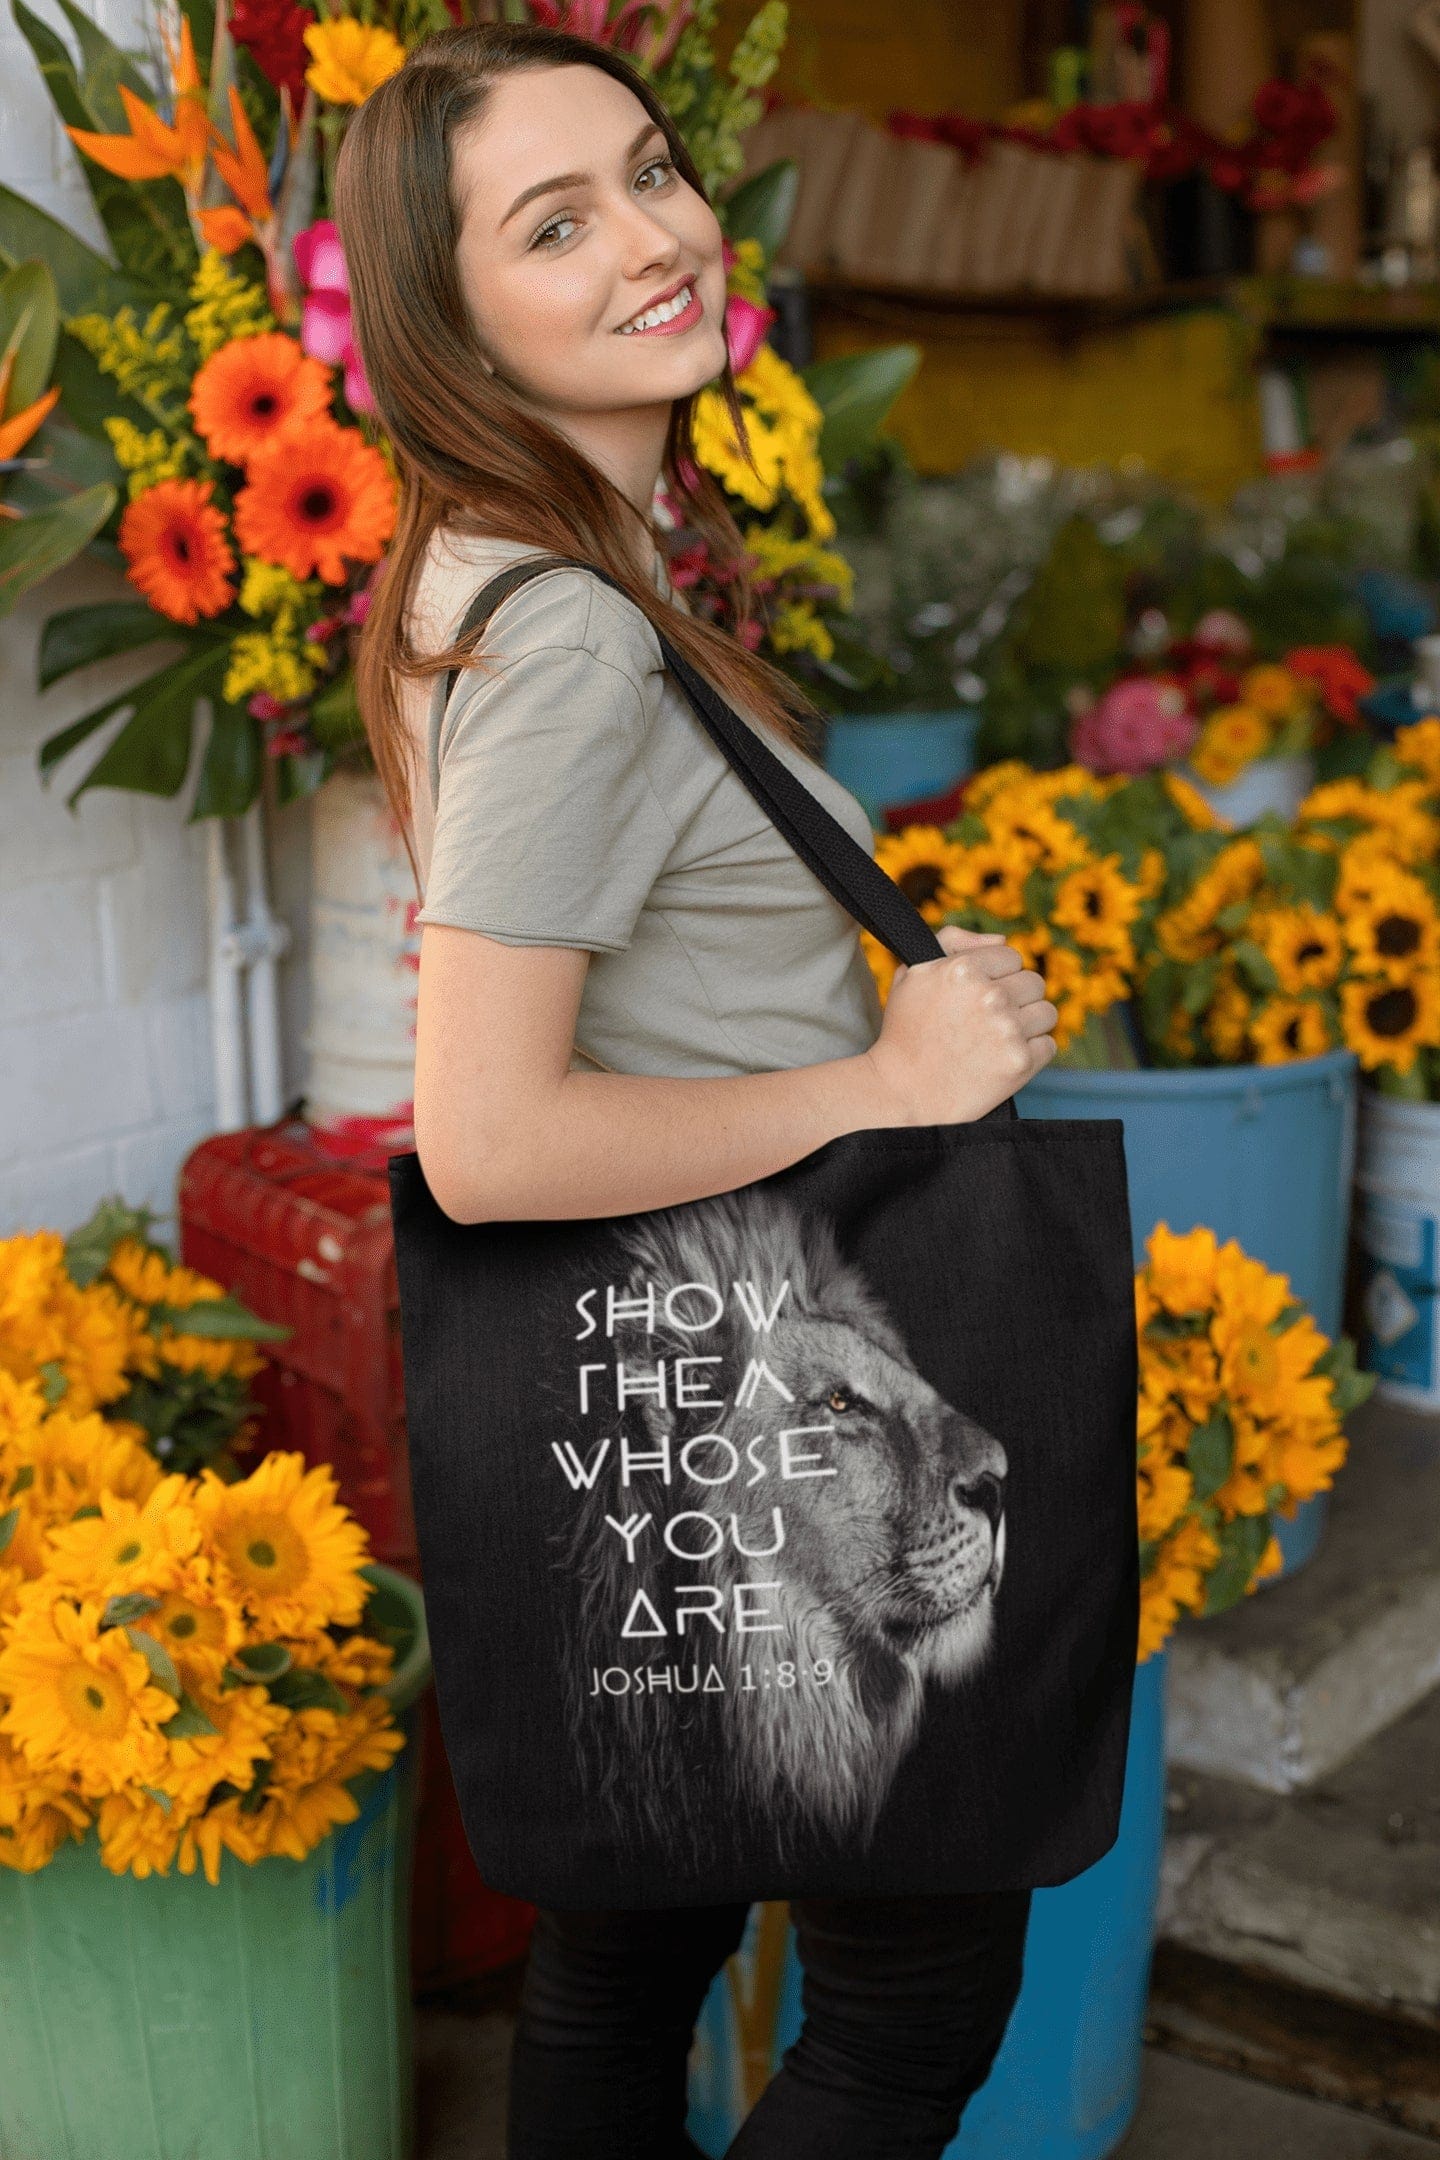 Printify Bags Show Them Whose You Are Christian Tote Bag